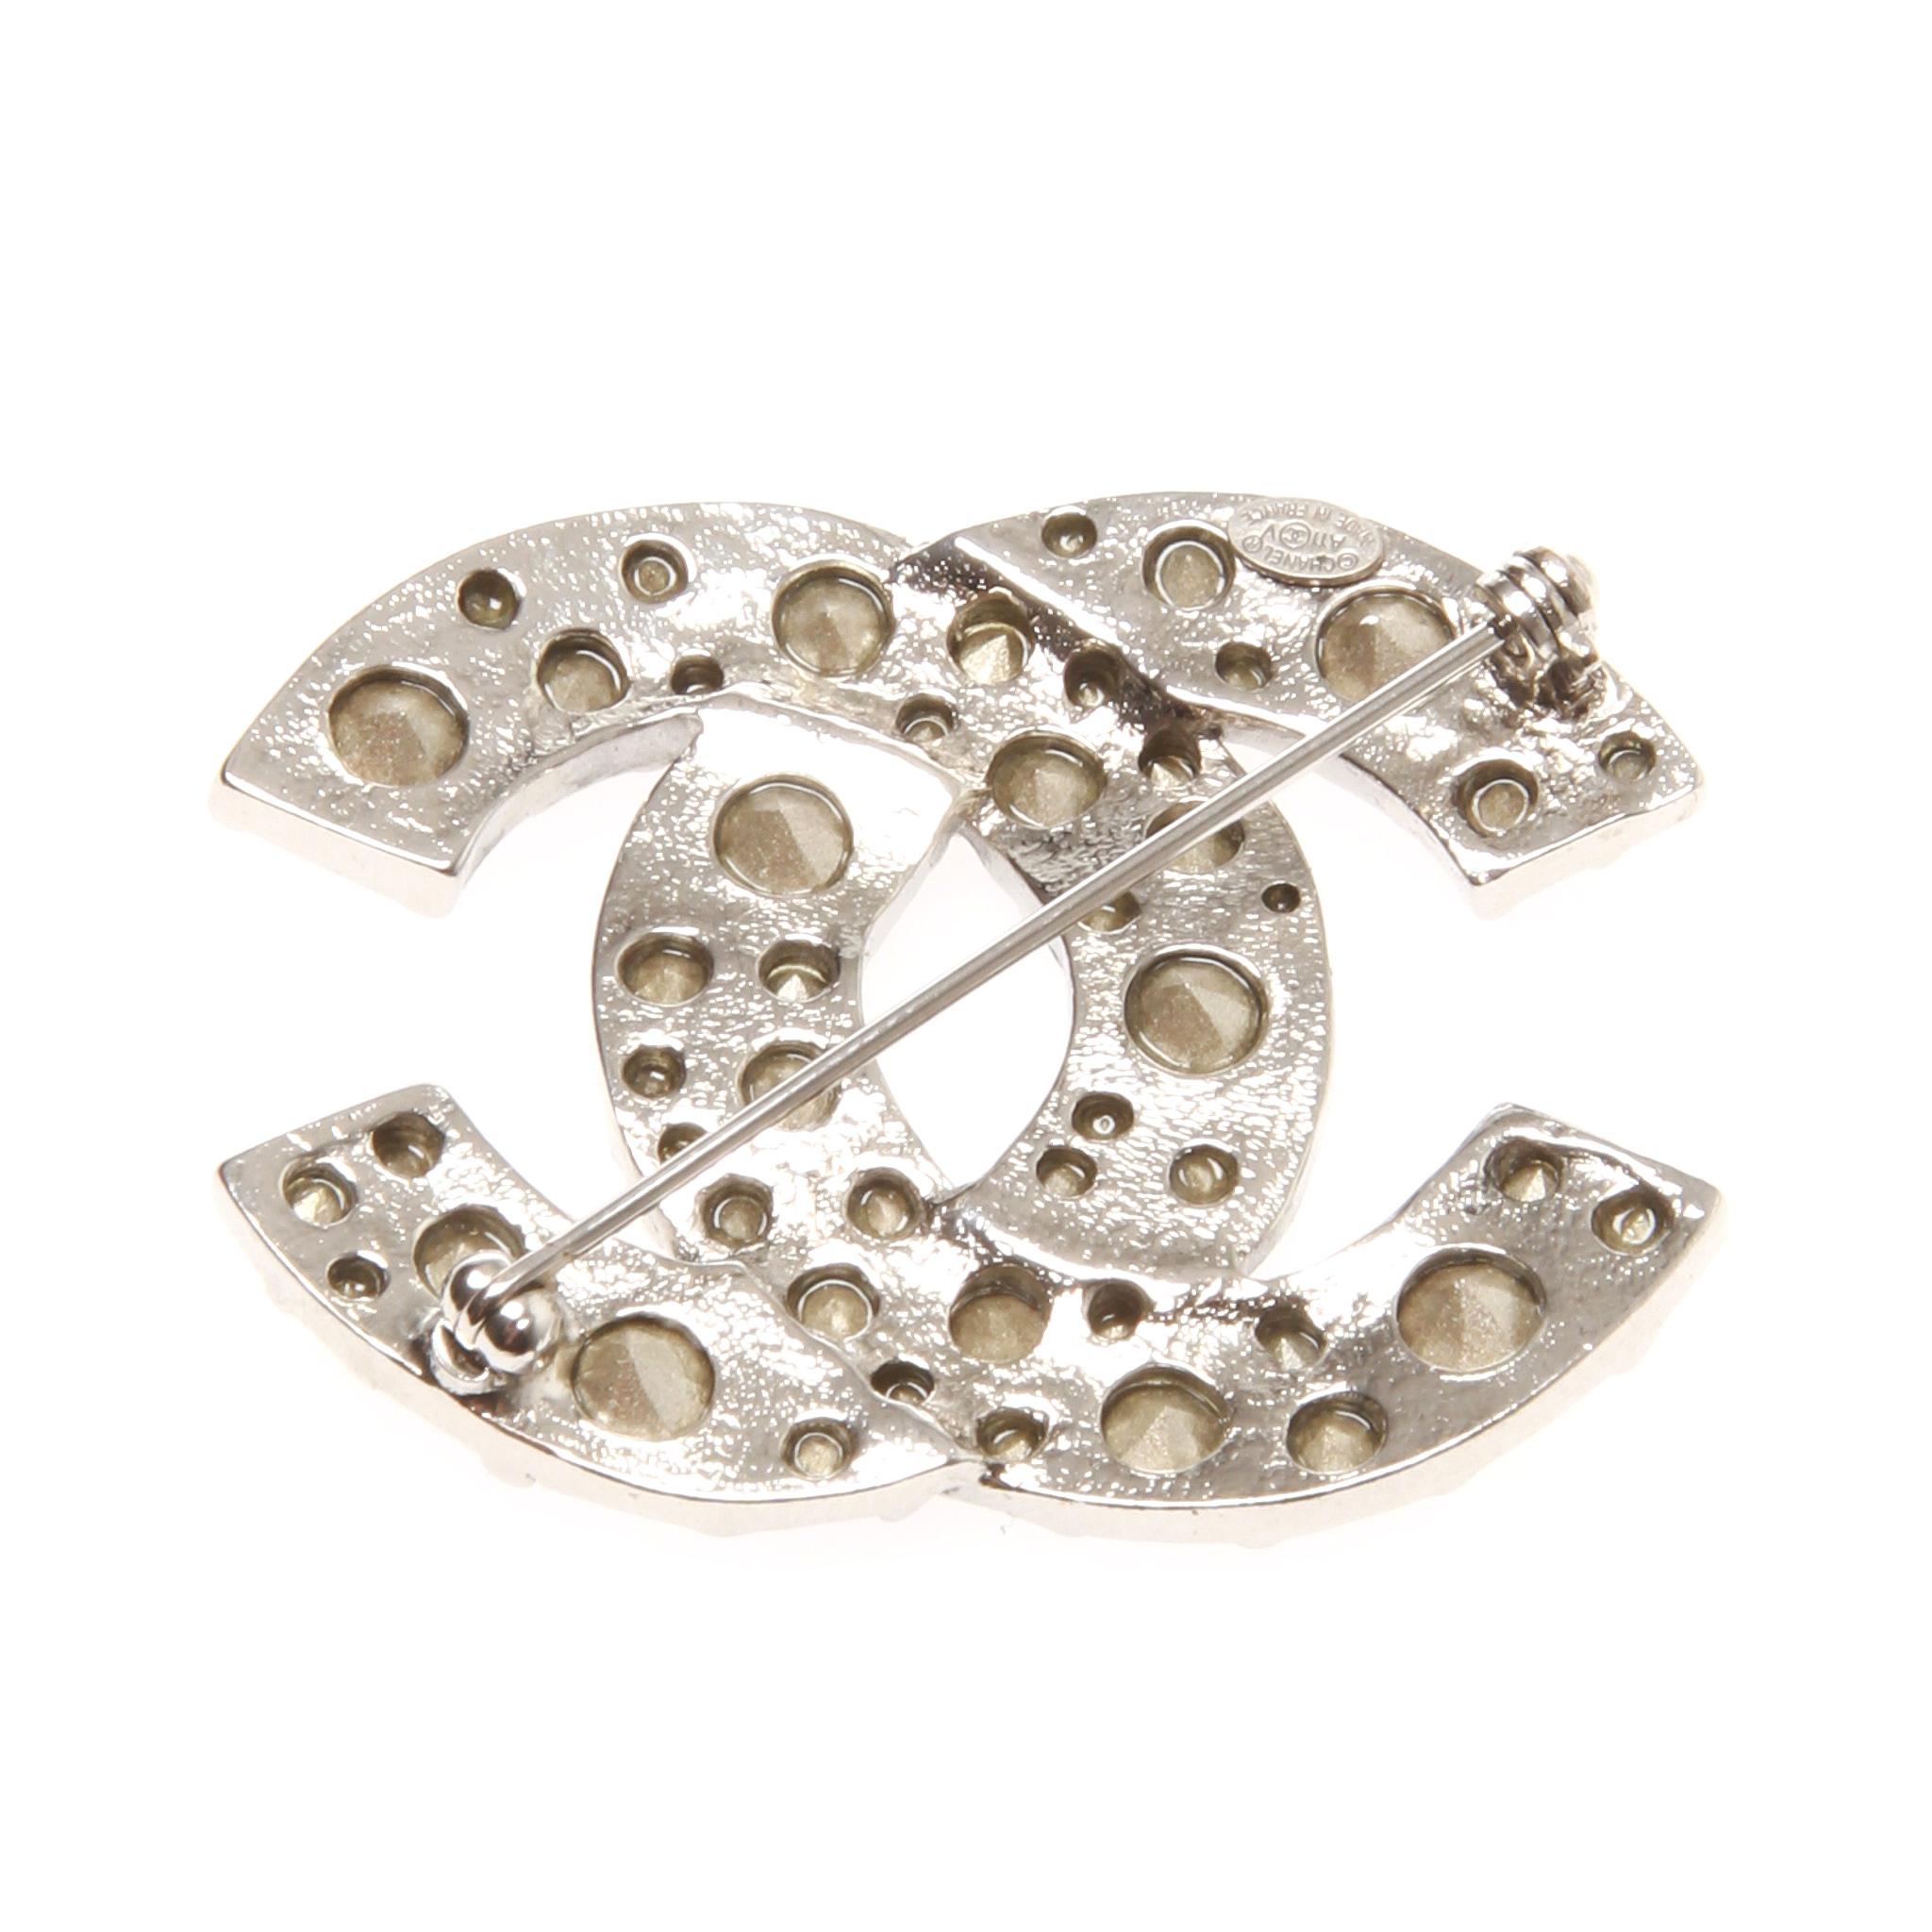 Chanel Iconic CC Logo Brooch
Classic, Iconic, Gorgeous.
An eye-catching brooch from Chanel you will not want to miss out on..
Colour: Clear and silver-tone
Closure/Opening: Roll needle
Production Year: 2011